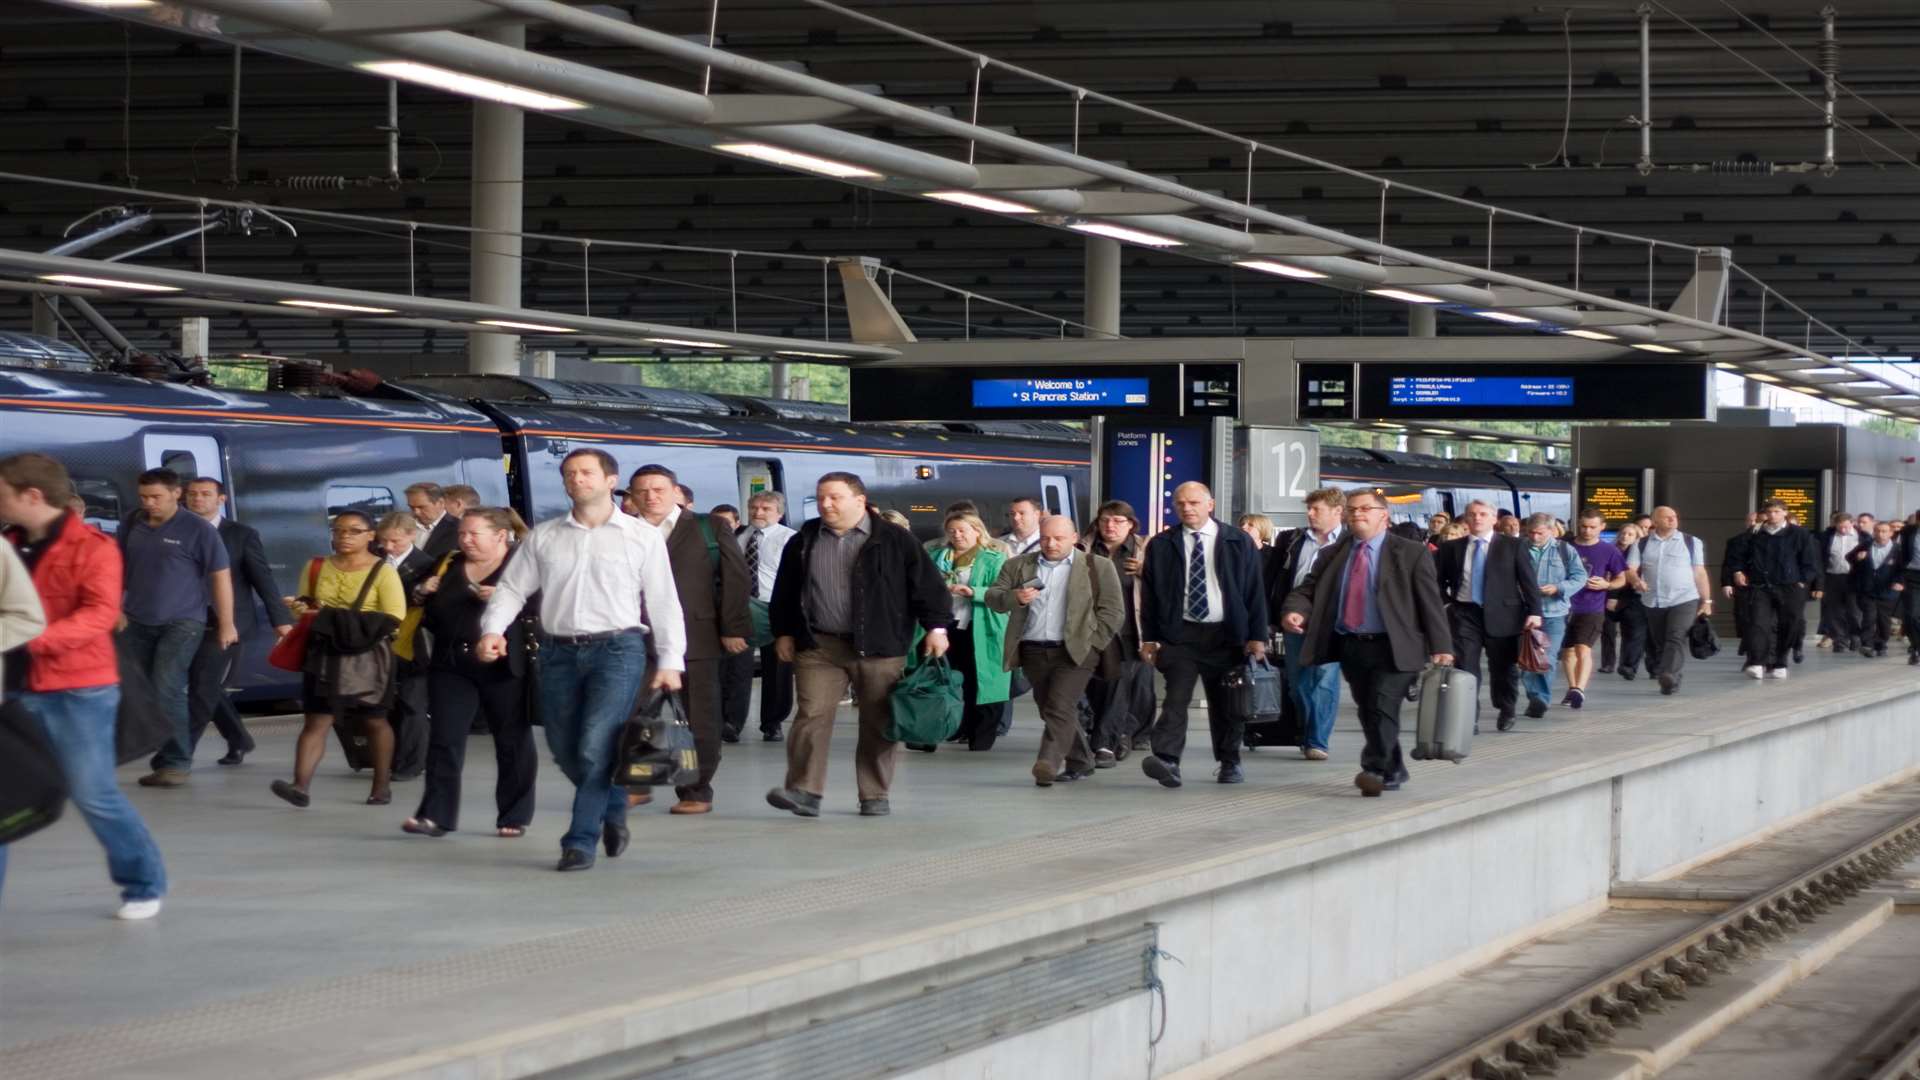 Passengers flood onto St Pancras station after the arrival of the high speed train